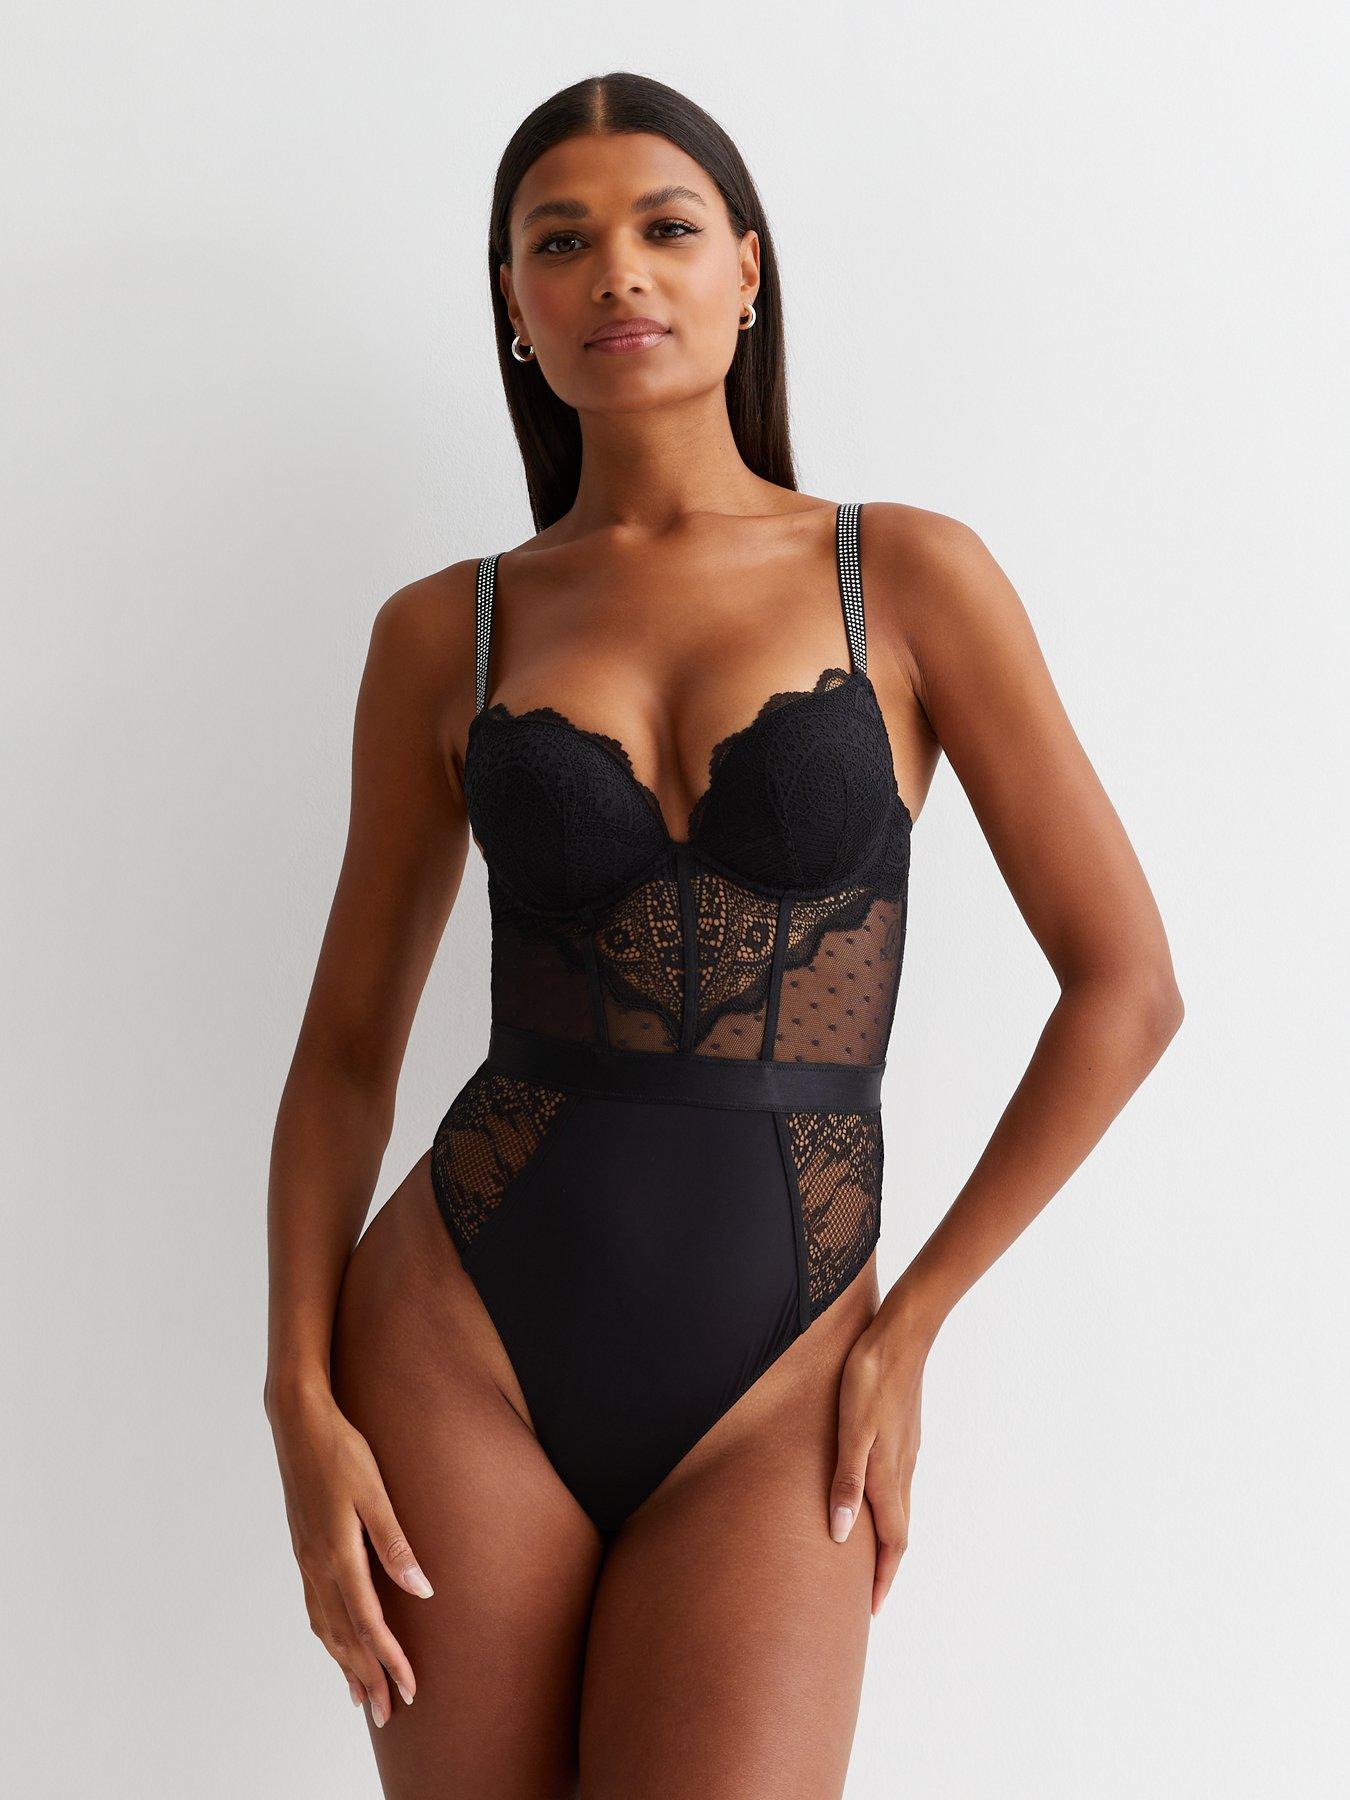 Lace Up Catsuit for €69.99 - Onesies - Hunkemöller